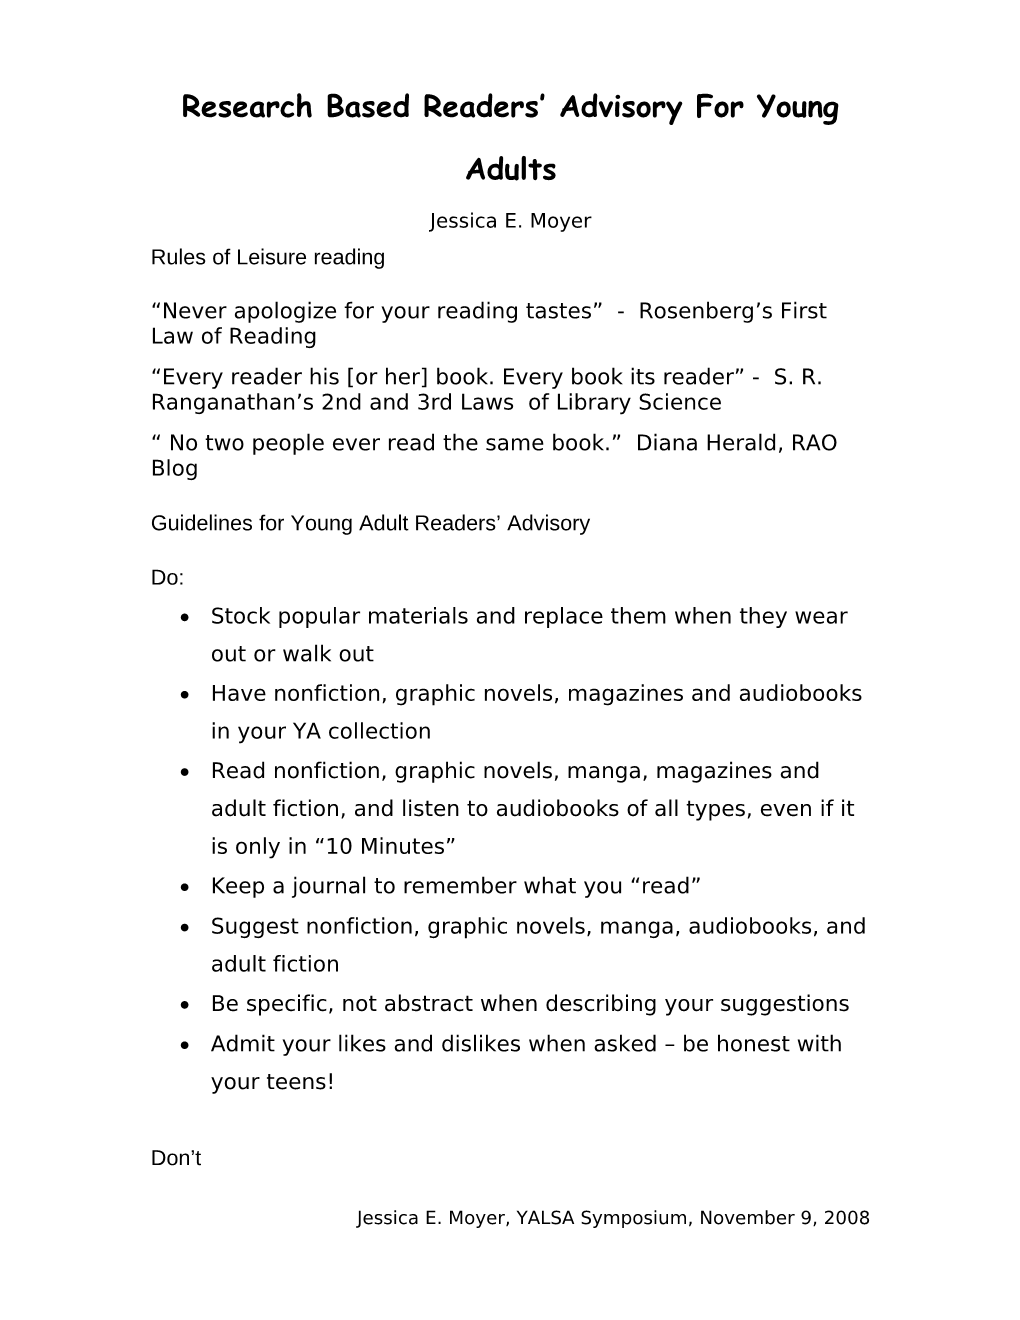 Research Based Readers Advisory for Young Adults